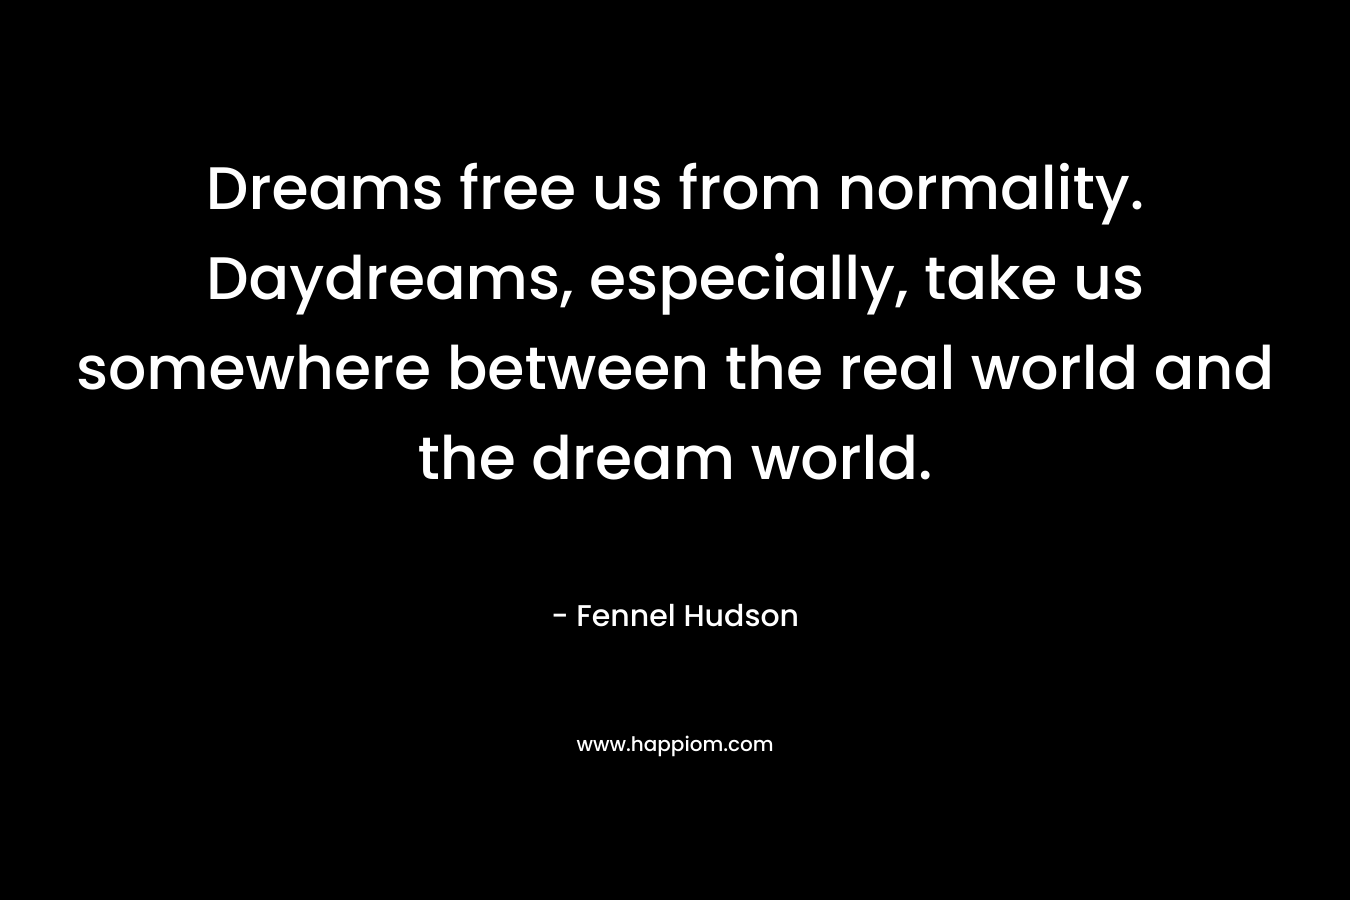 Dreams free us from normality. Daydreams, especially, take us somewhere between the real world and the dream world.